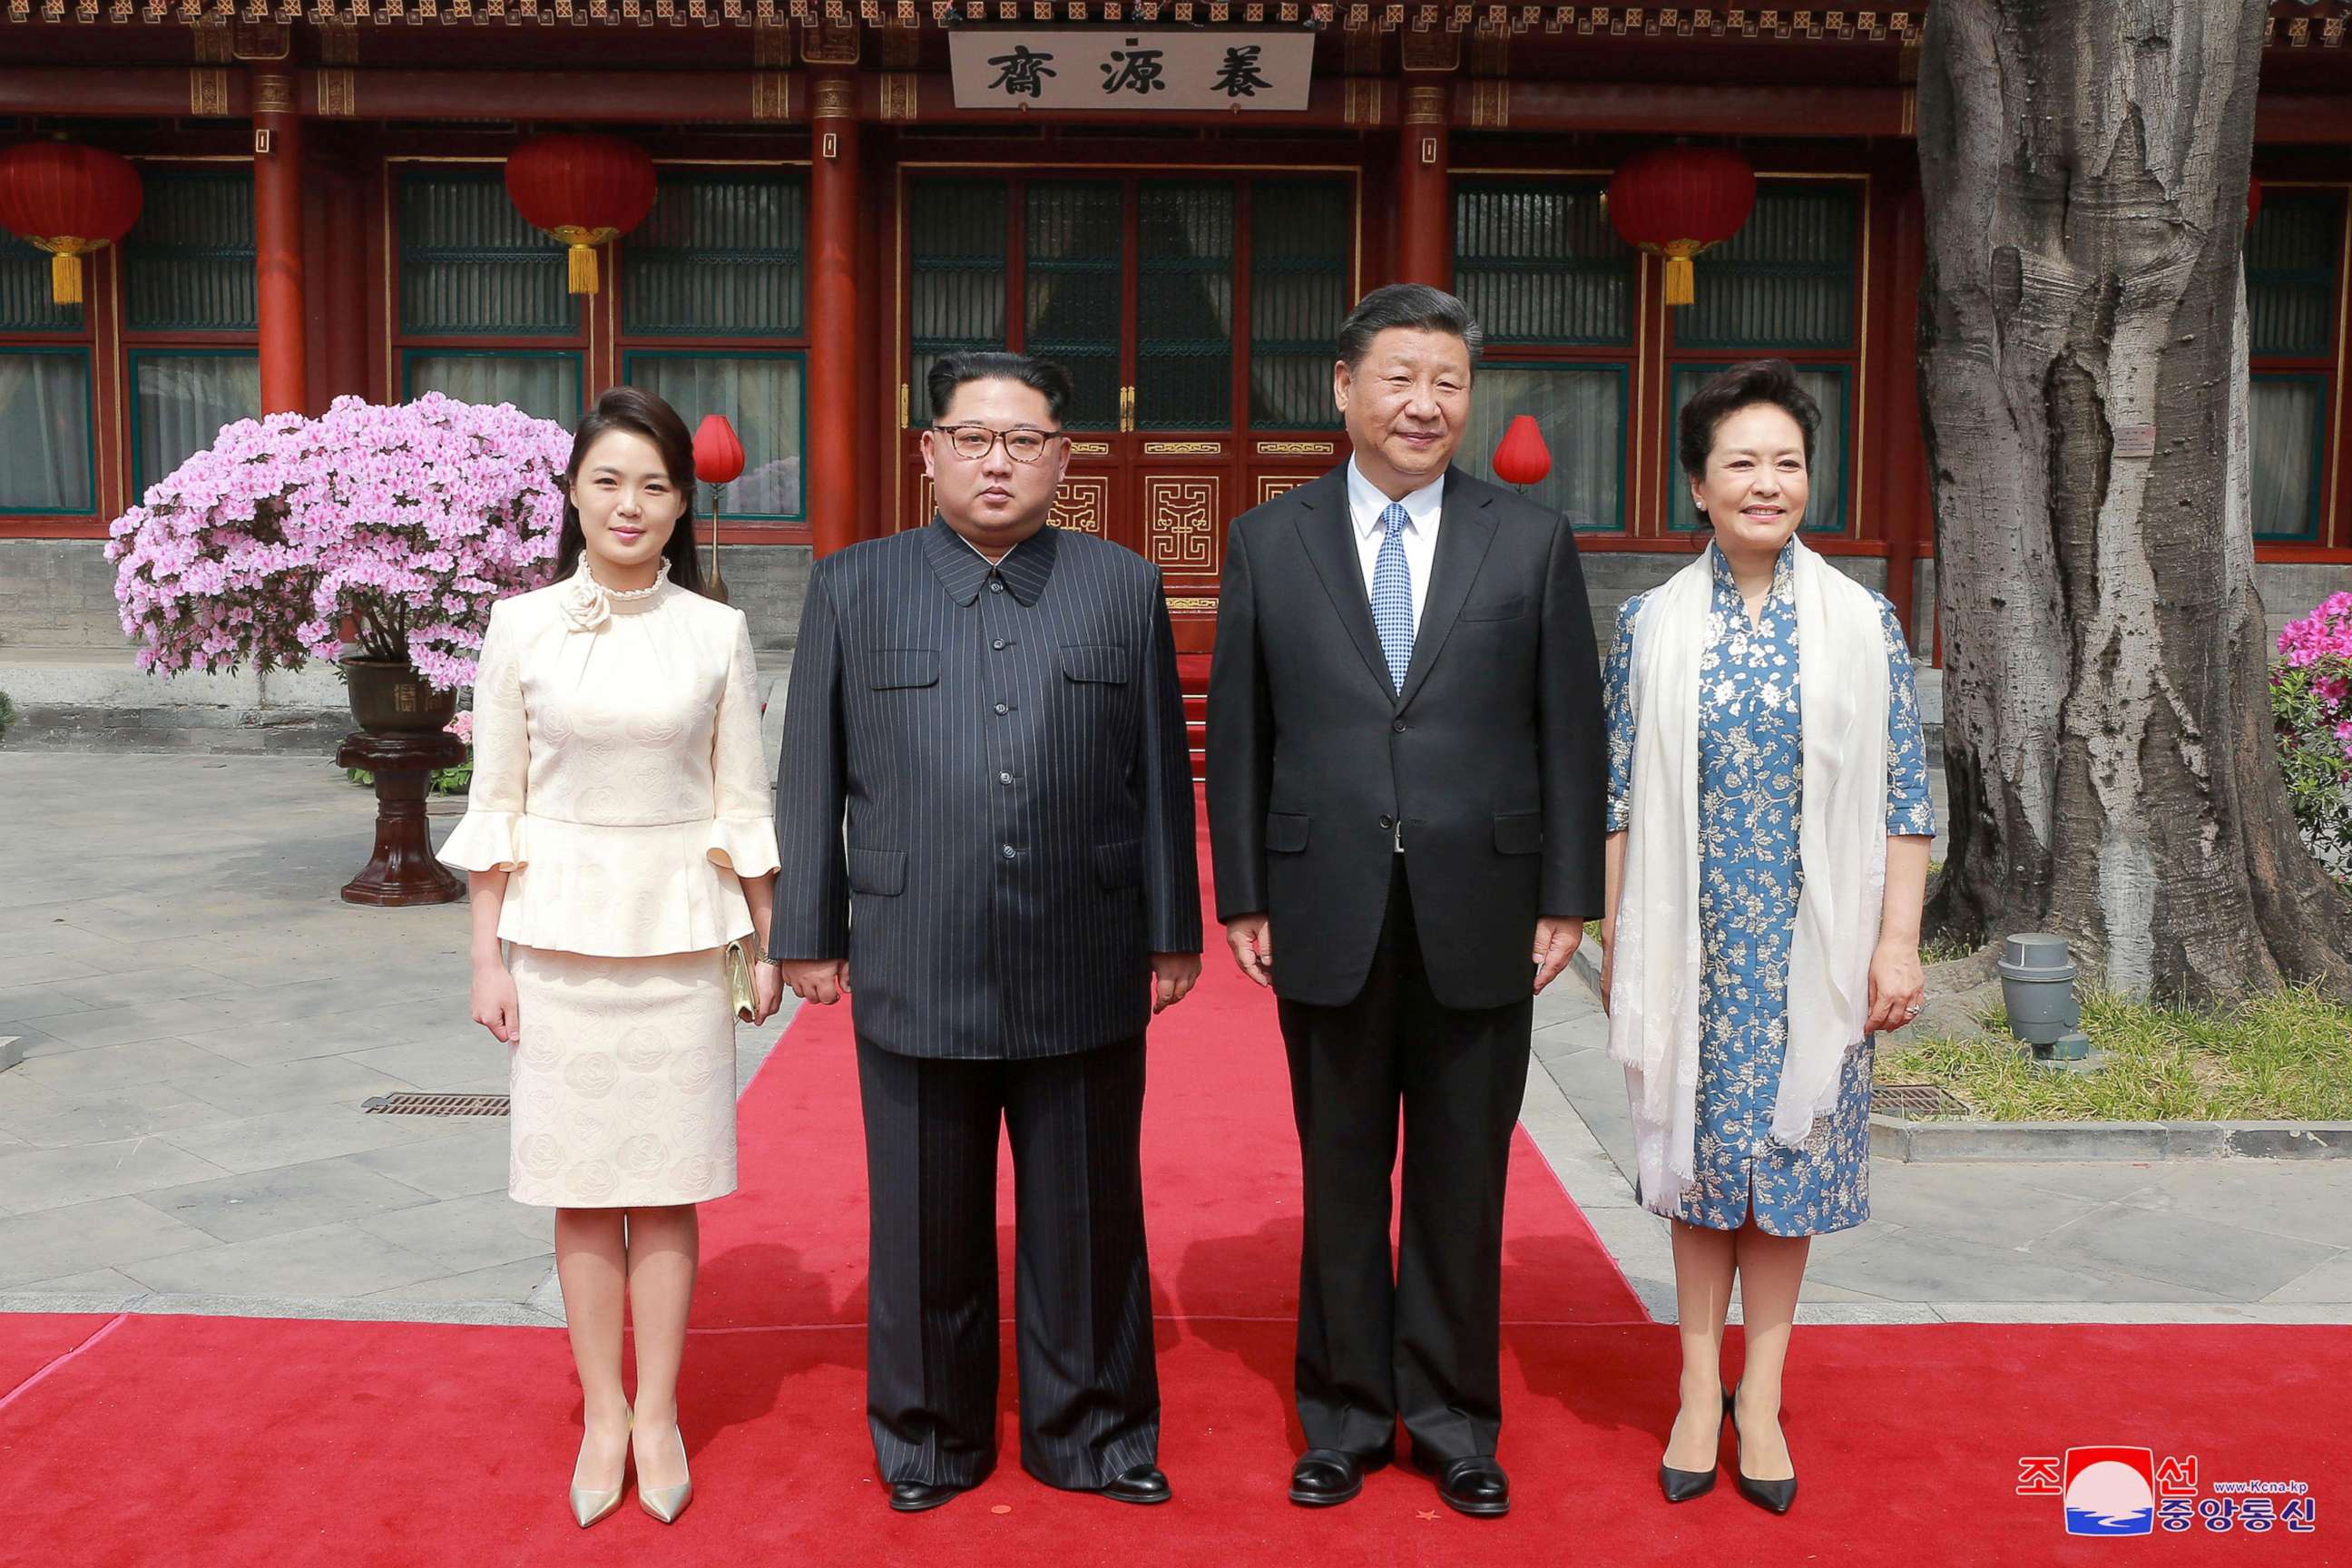 PHOTO: North Korean leader Kim Jong Un and wife Ri Sol Ju, and Chinese President Xi Jinping and wife Peng Liyuan pose for a photo in Beijing, China in this undated photo released by North Korea's Korean Central News Agency in Pyongyang March 28, 2018